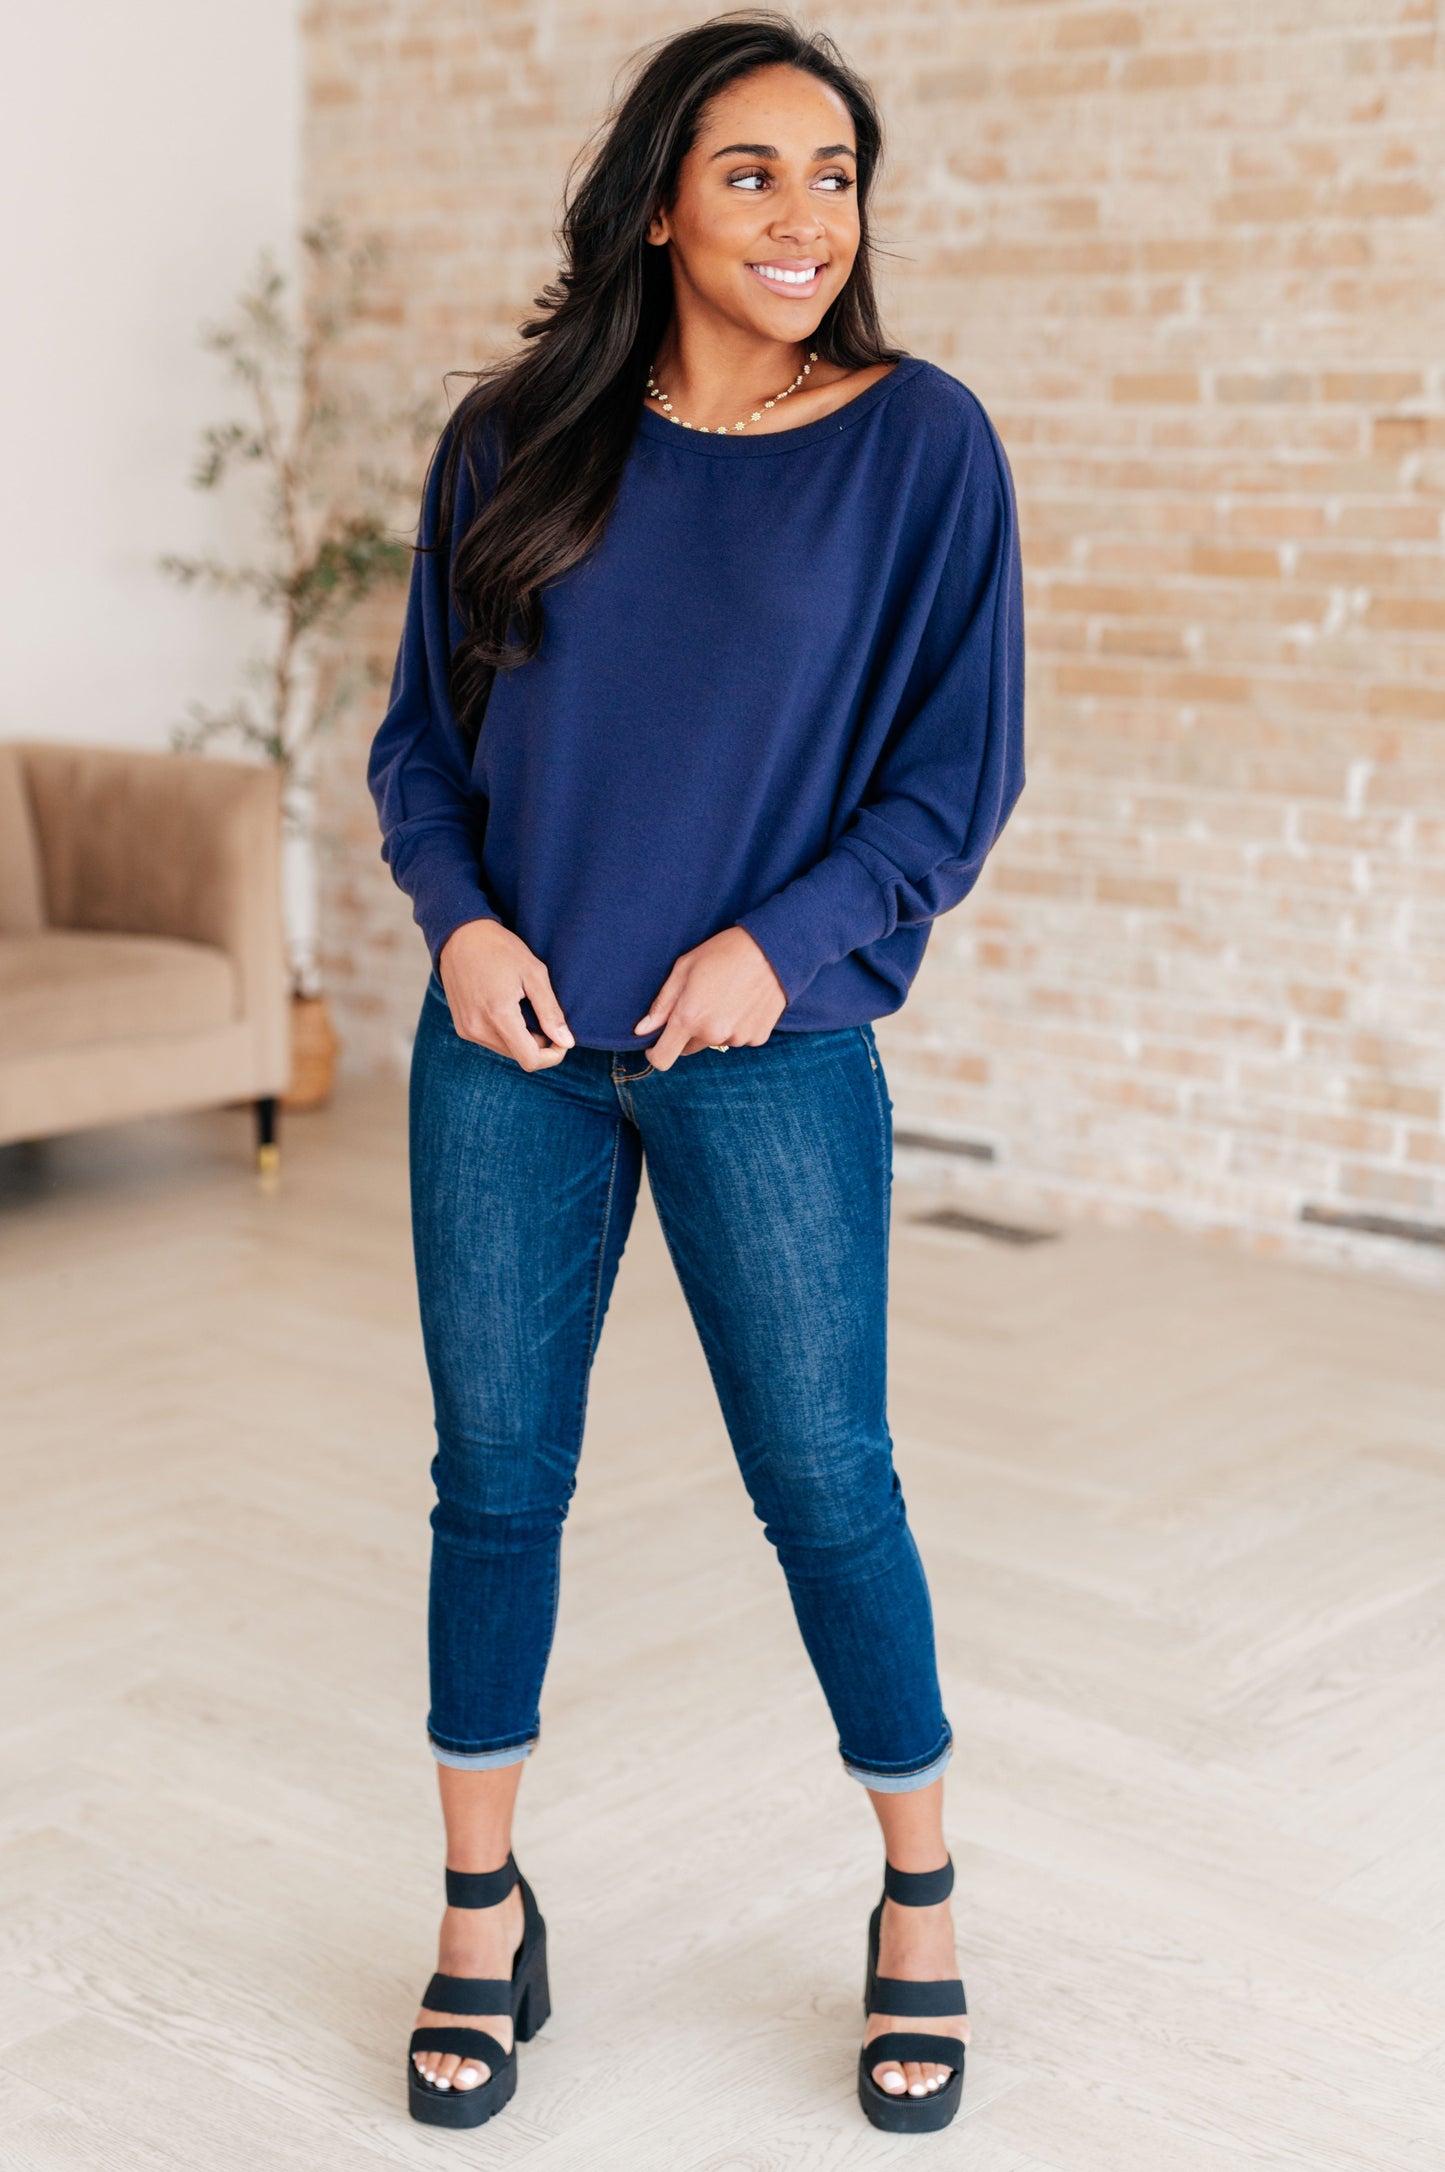 Casually Comfy Batwing Top in Navy